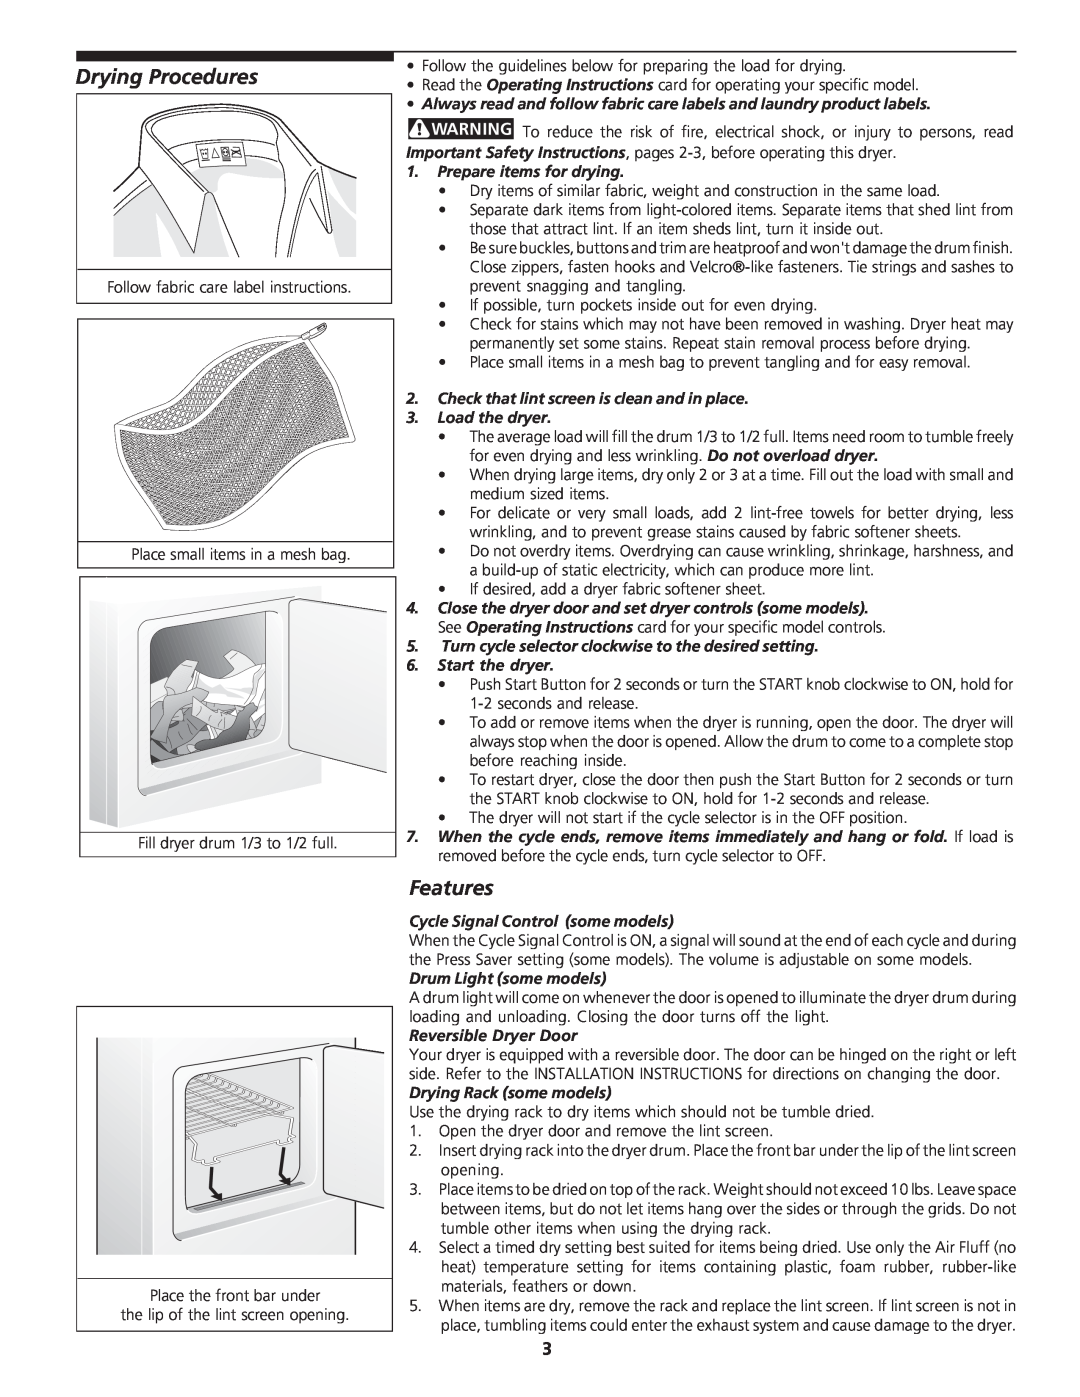 Airlux Group 13467-1200 (0512) important safety instructions Drying Procedures, Features 